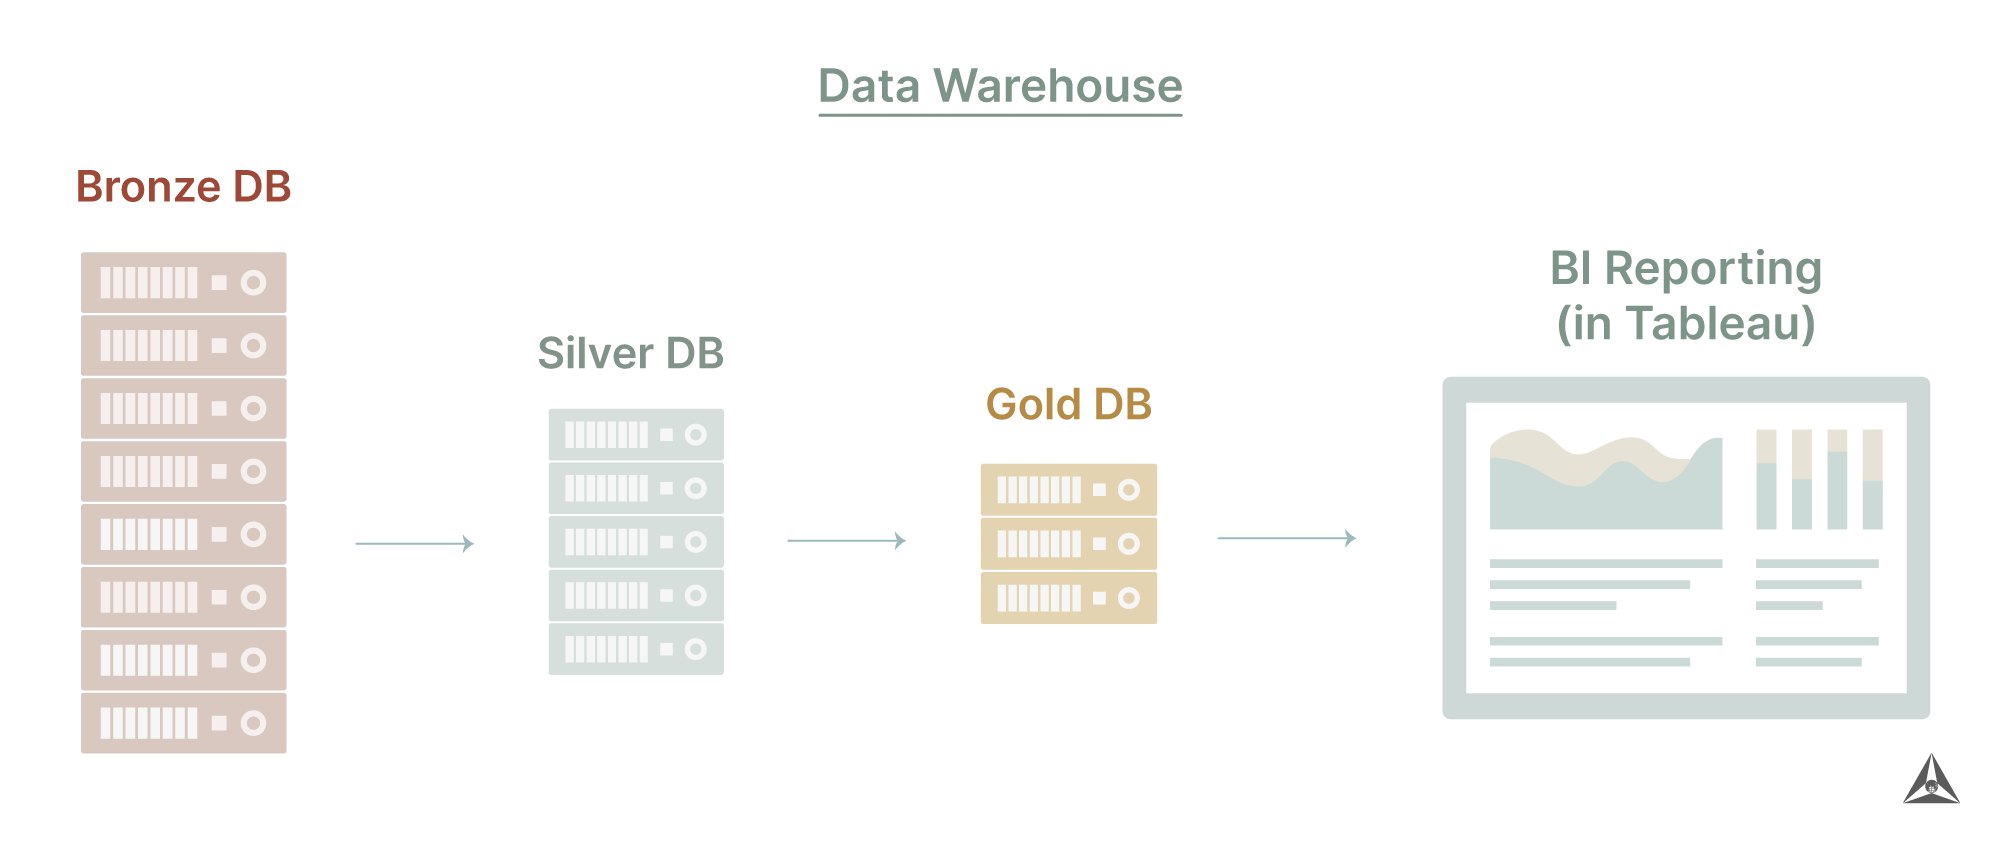 Illustration of how the complex data is processed through three databases to generate the Business Intelligence Report